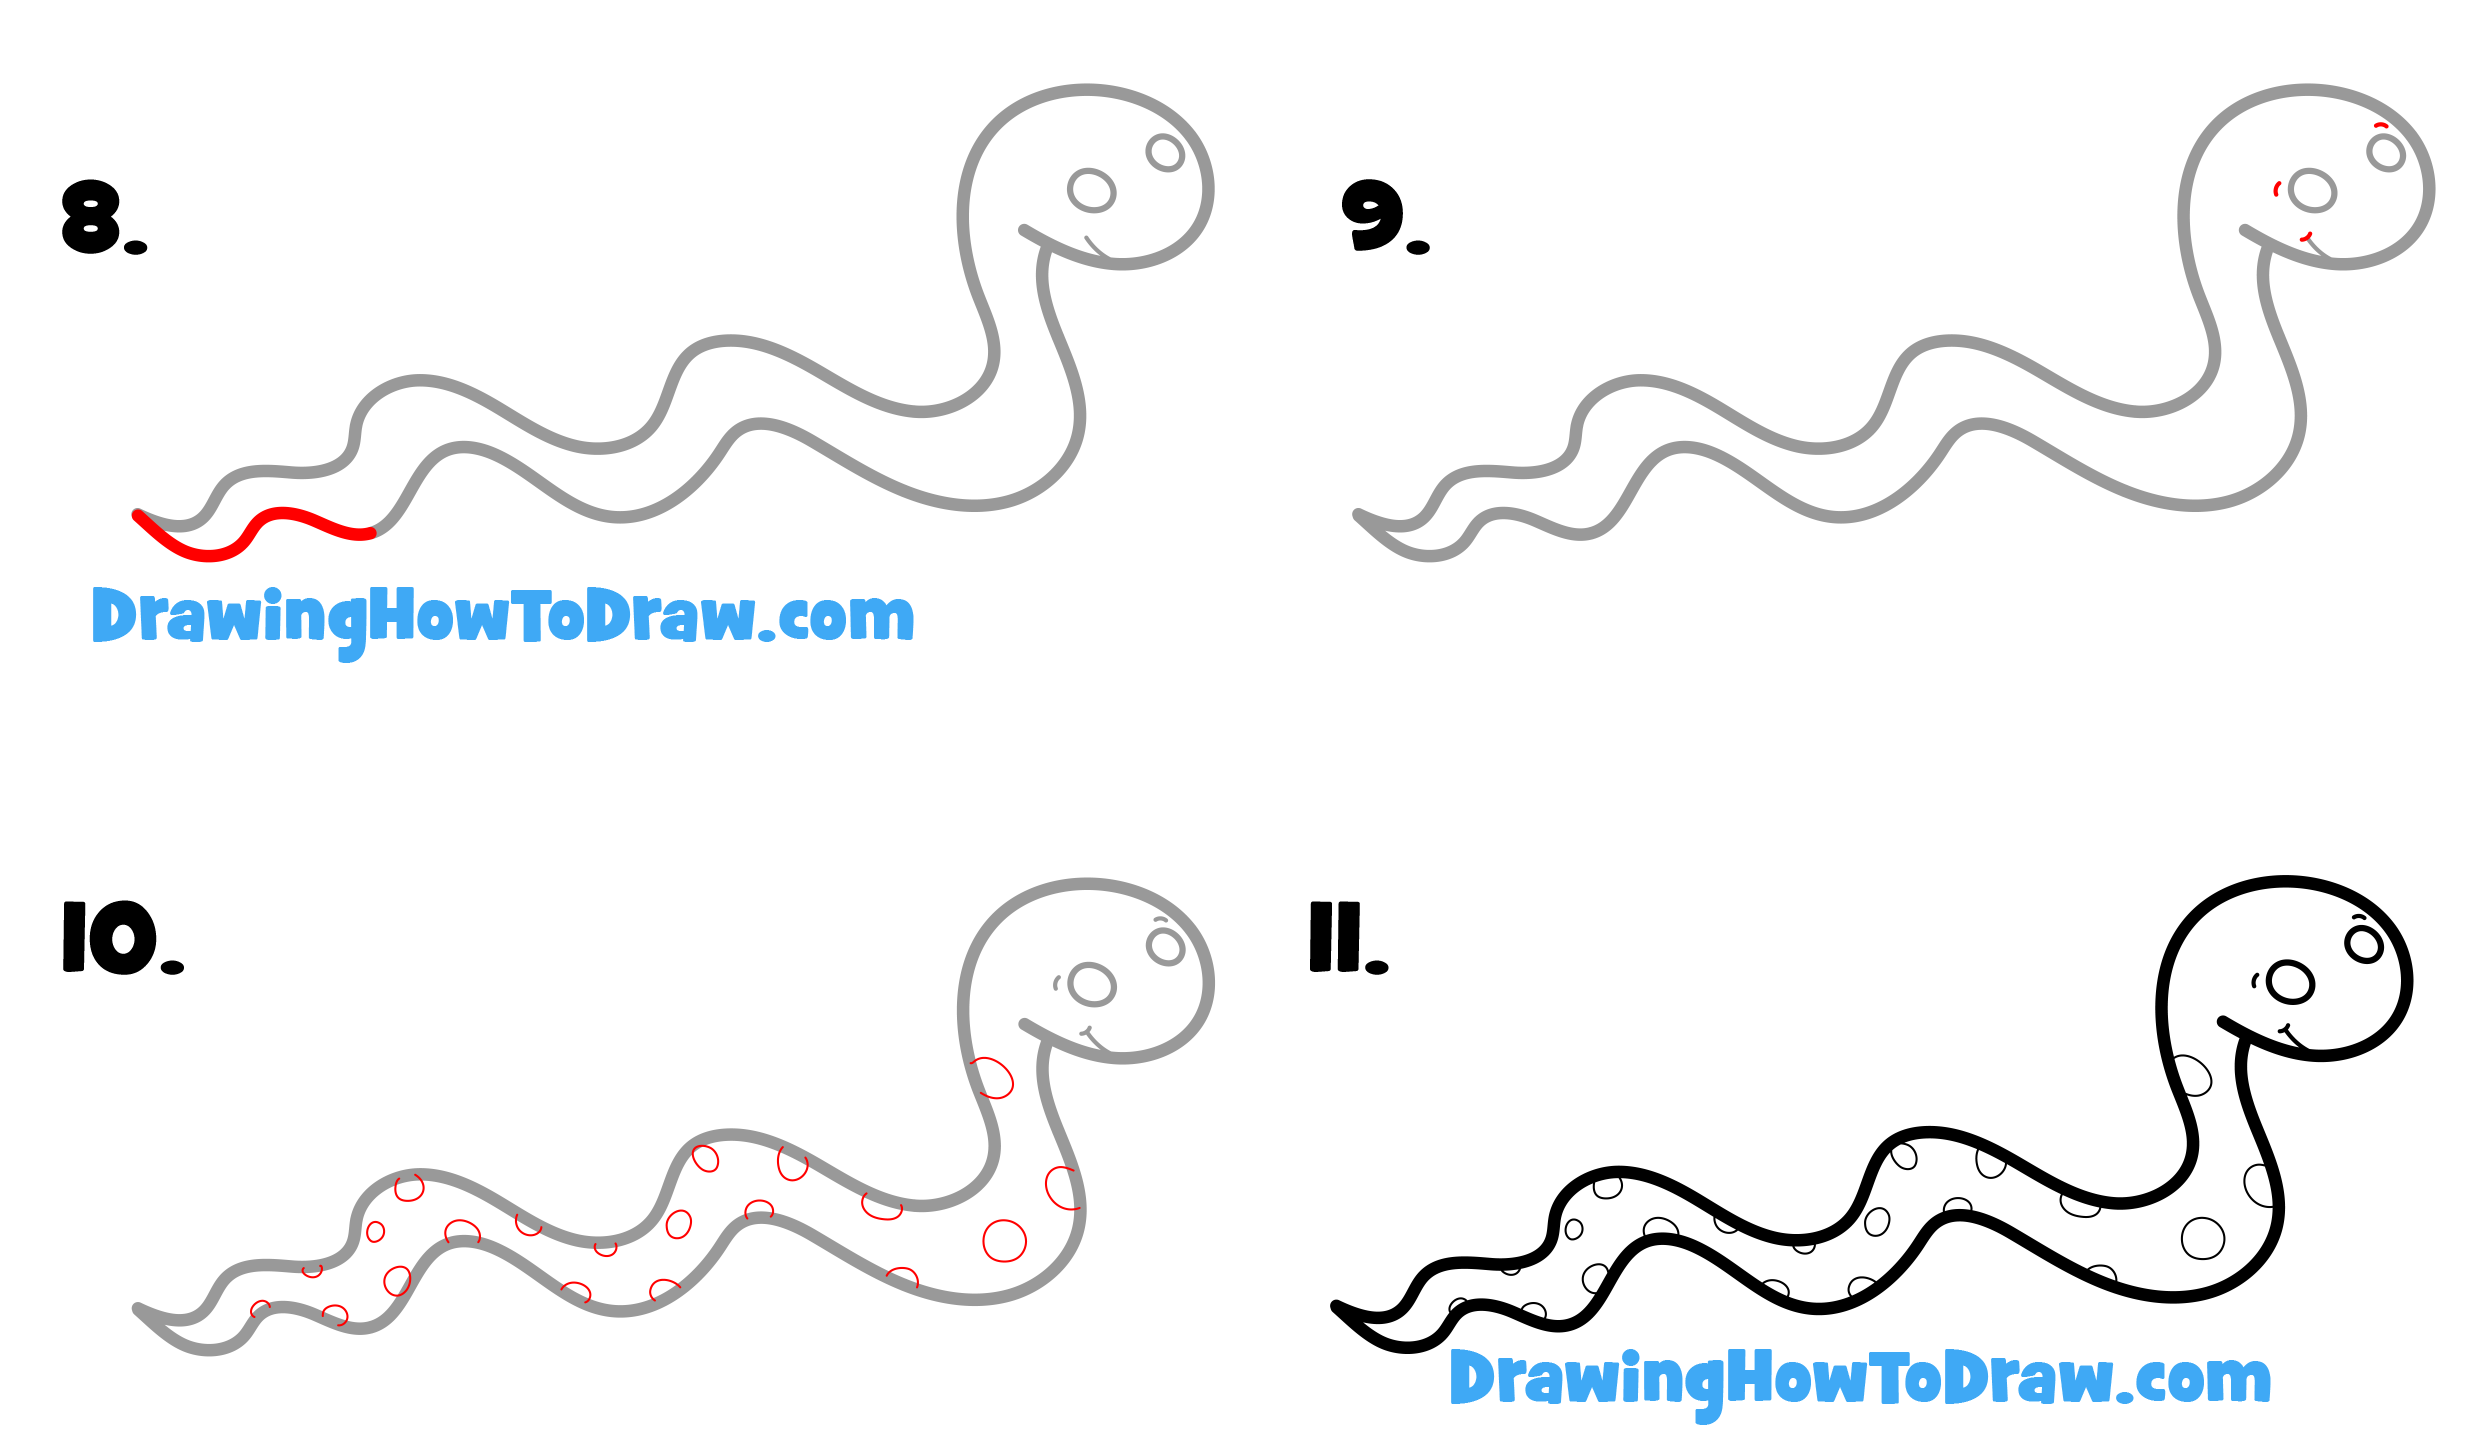 Learn How to Draw a Cartoon Snake Easy Step-by-Step Drawing Tutorial for Kids